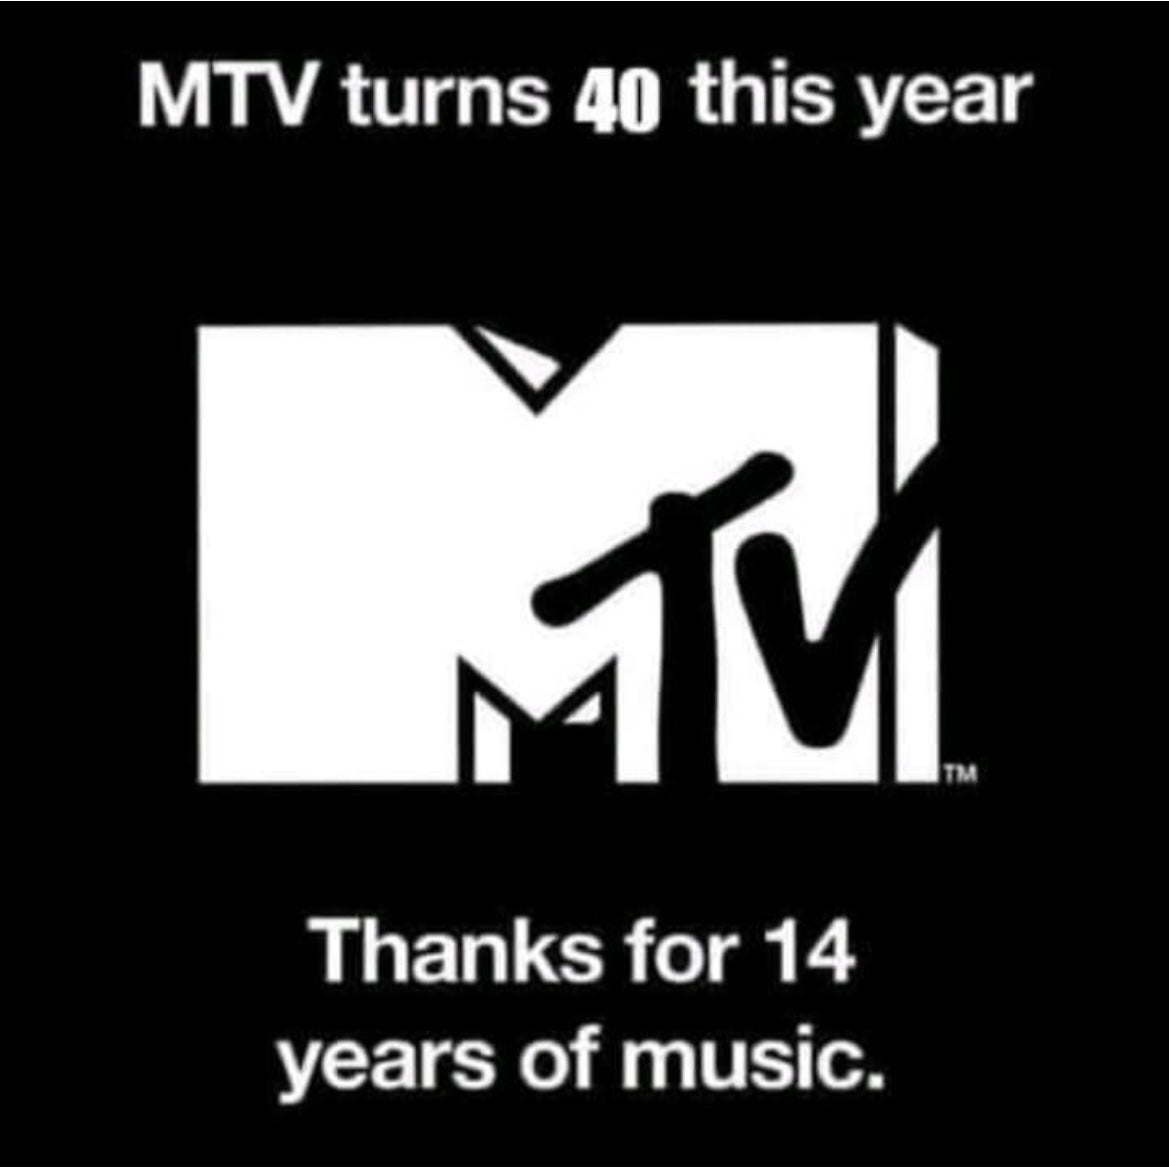 MTV turns 40 this year. Thanks for 14 years of music